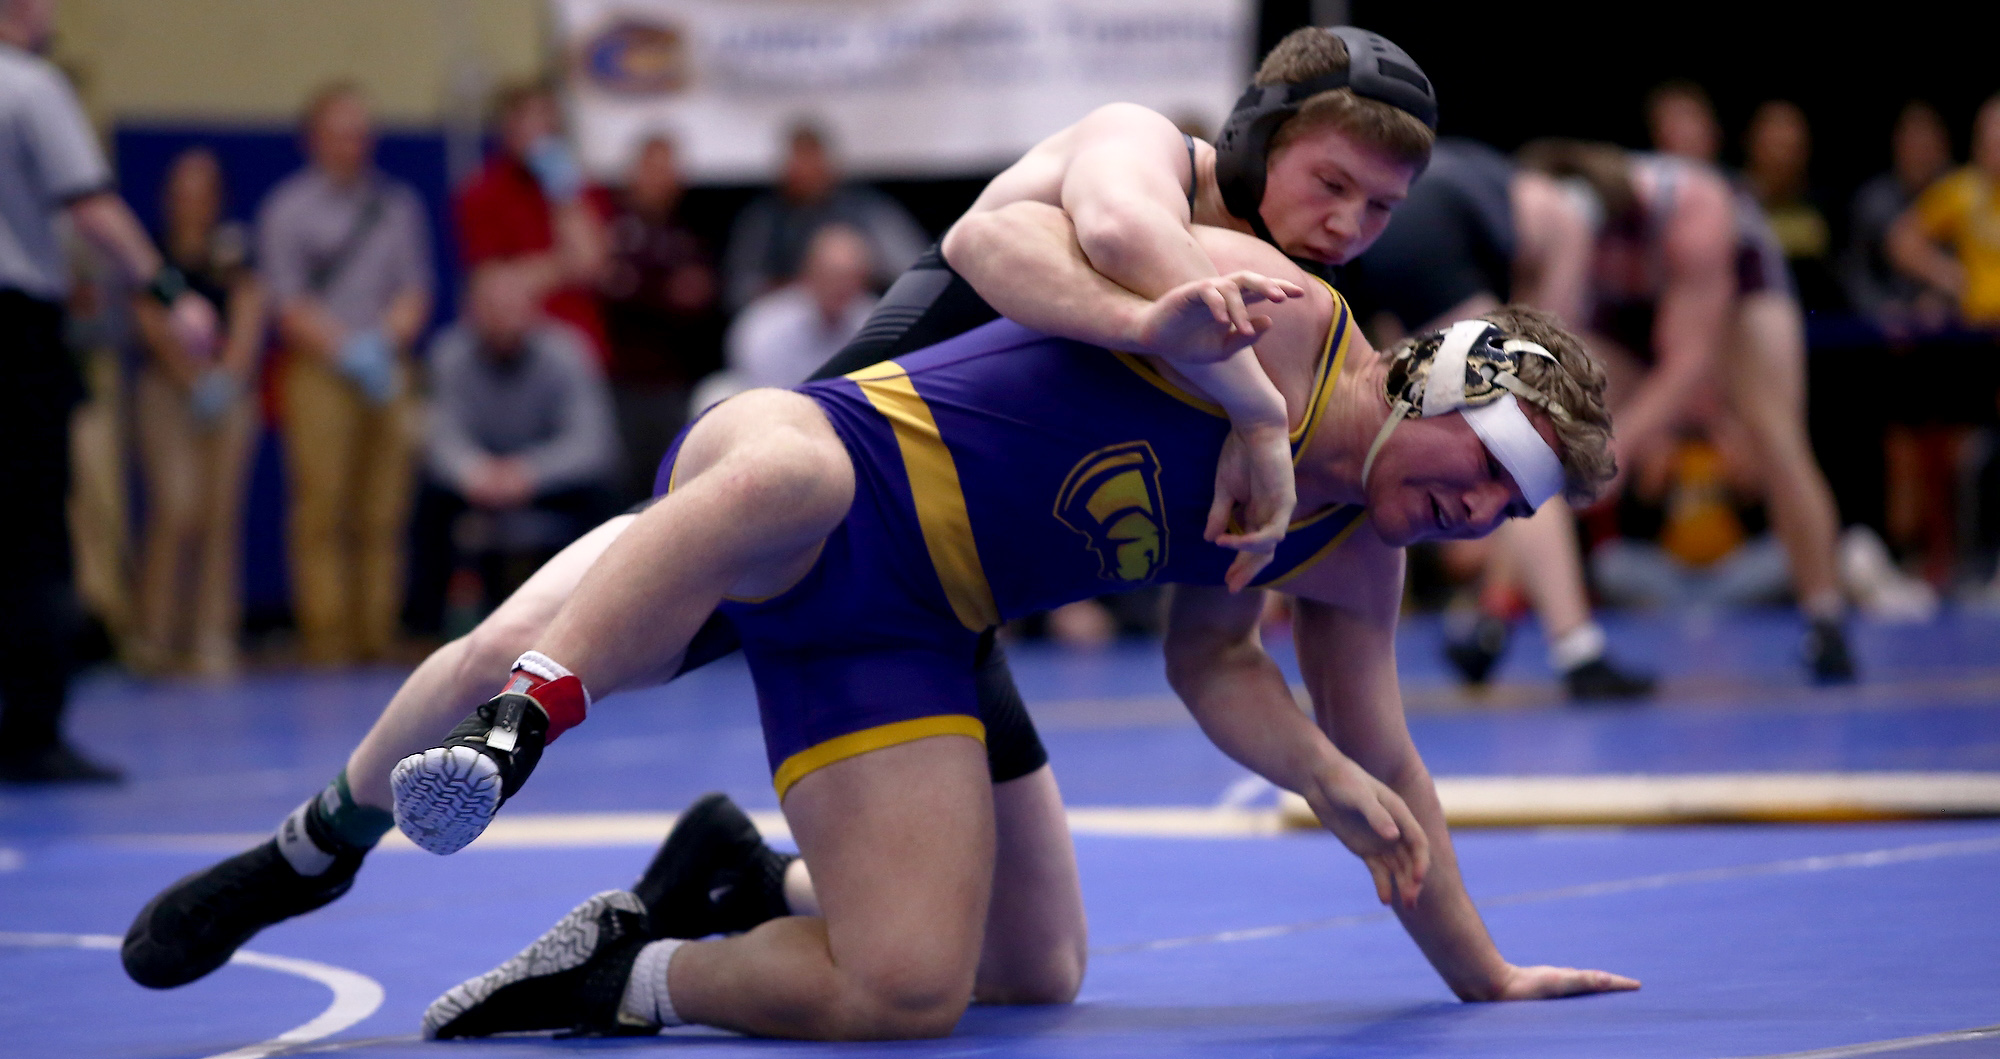 Beau Yineman compiled a 2-1 record and finished second in the 197-pound weight class at the WIAC Championship.